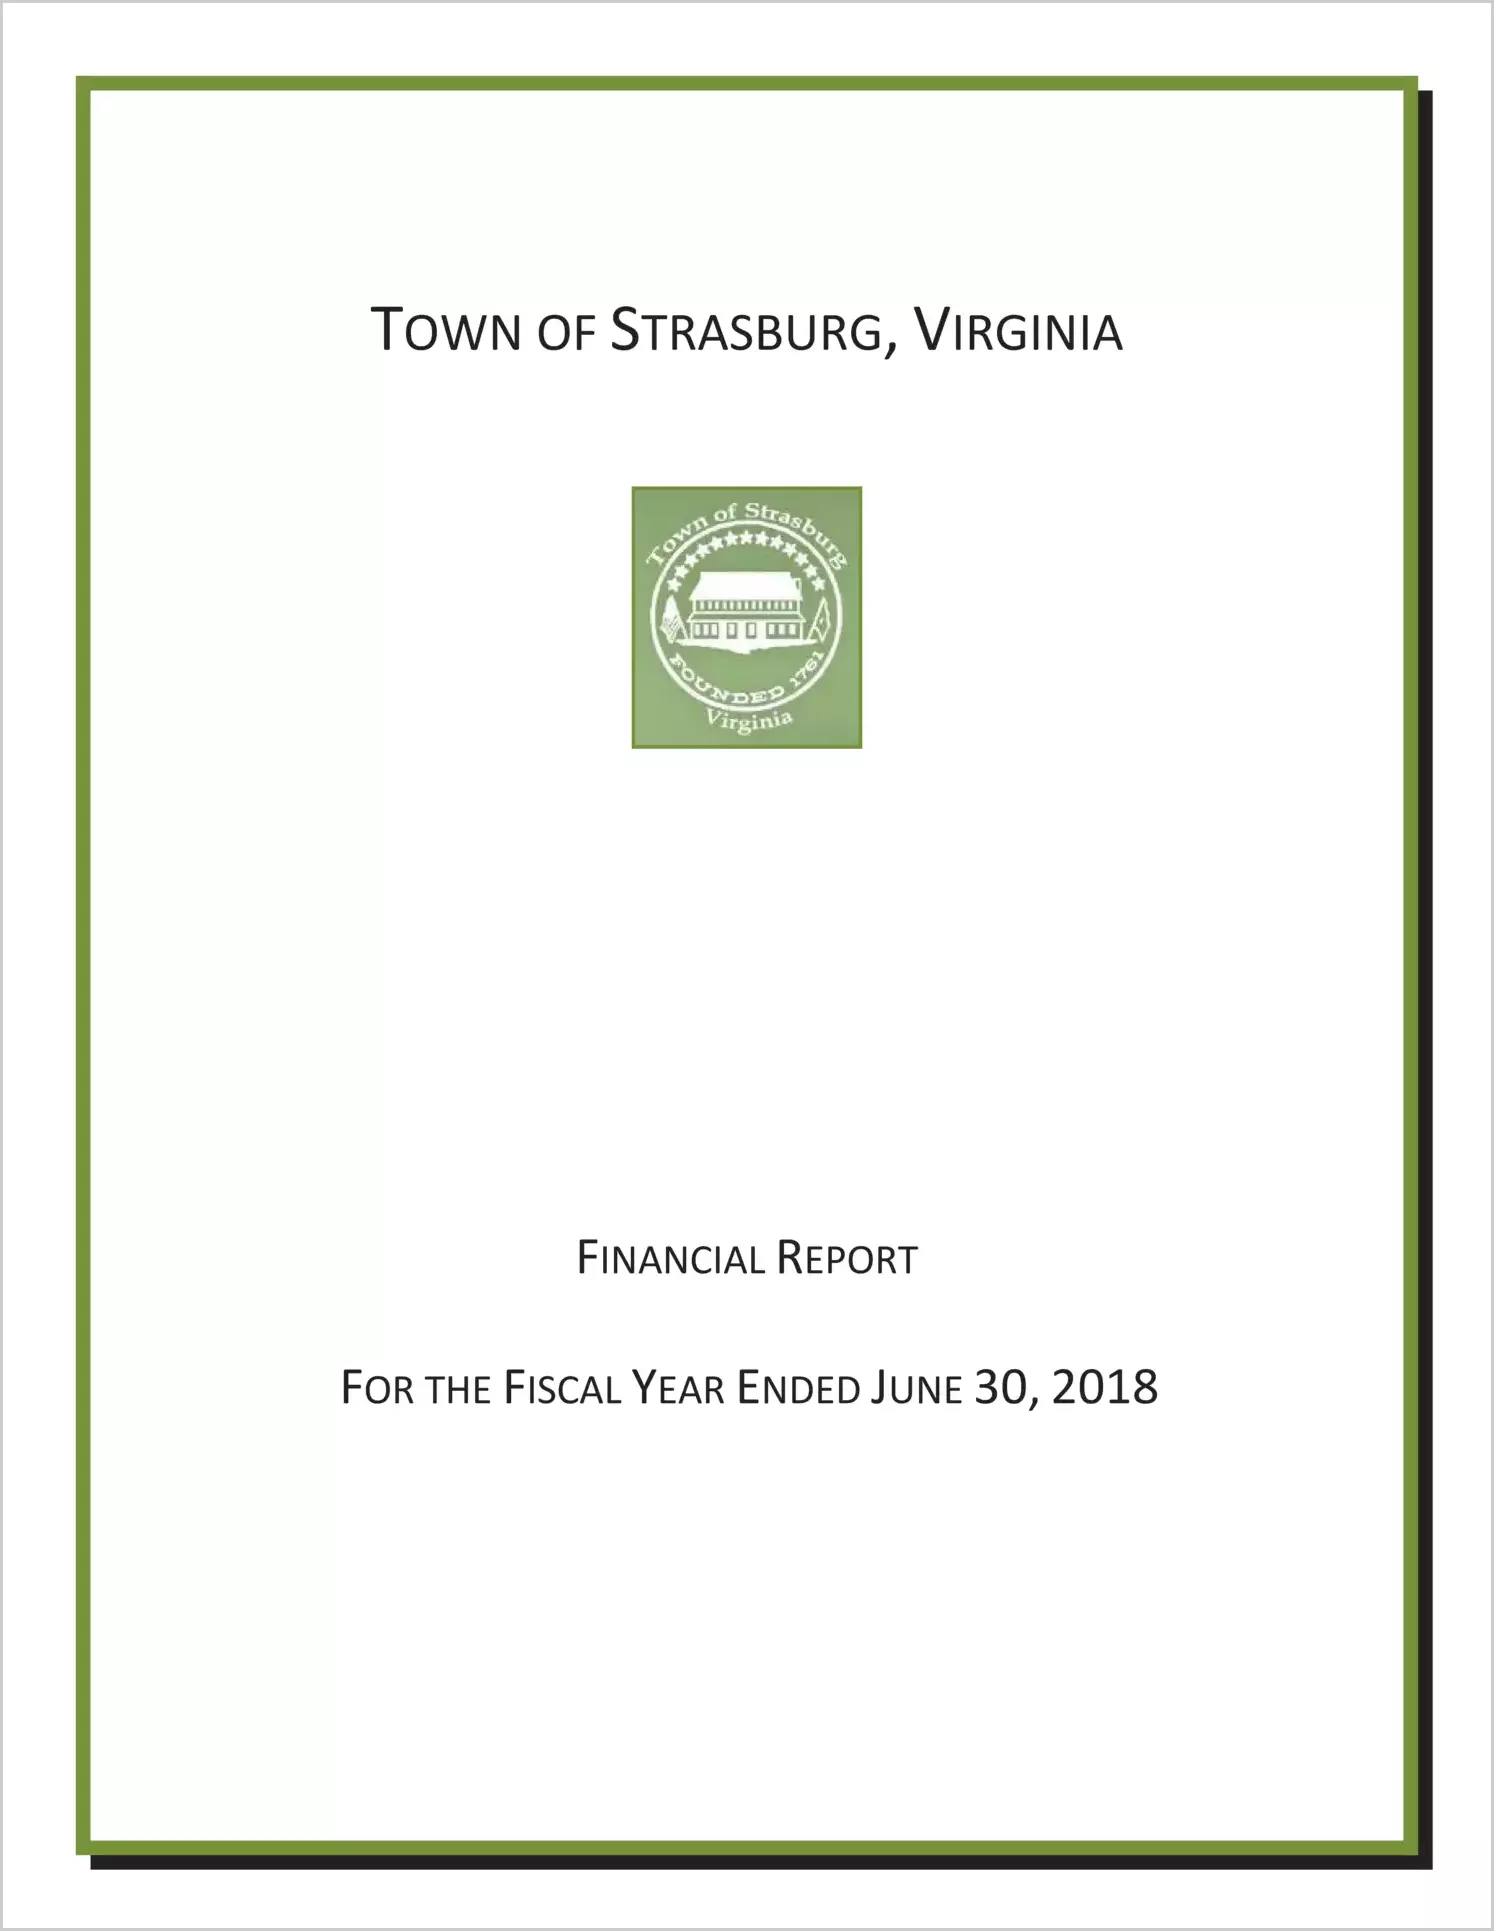 2018 Annual Financial Report for Town of Strasburg